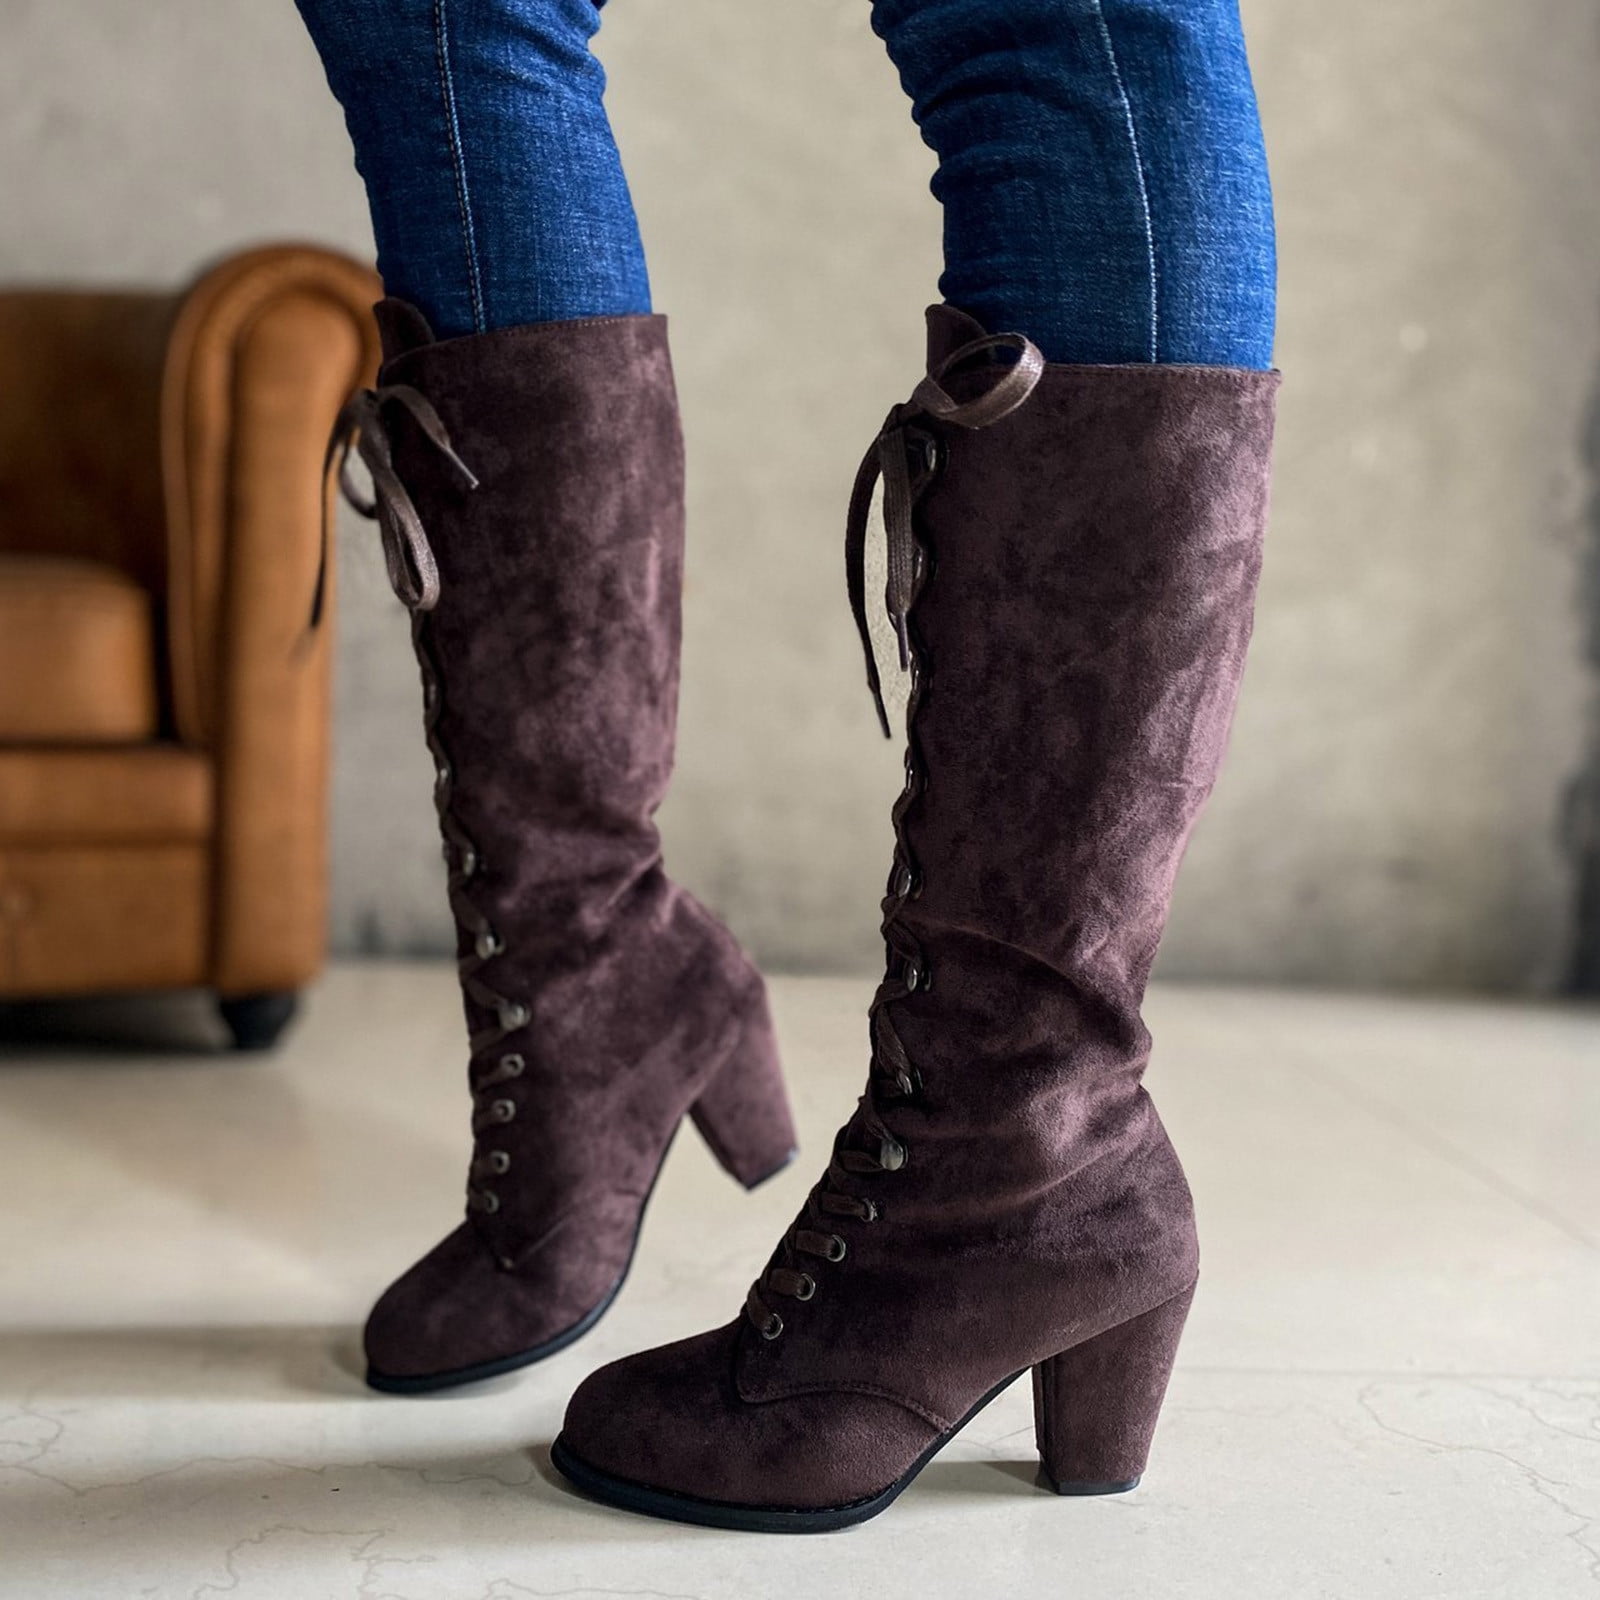 suede dress boots womens